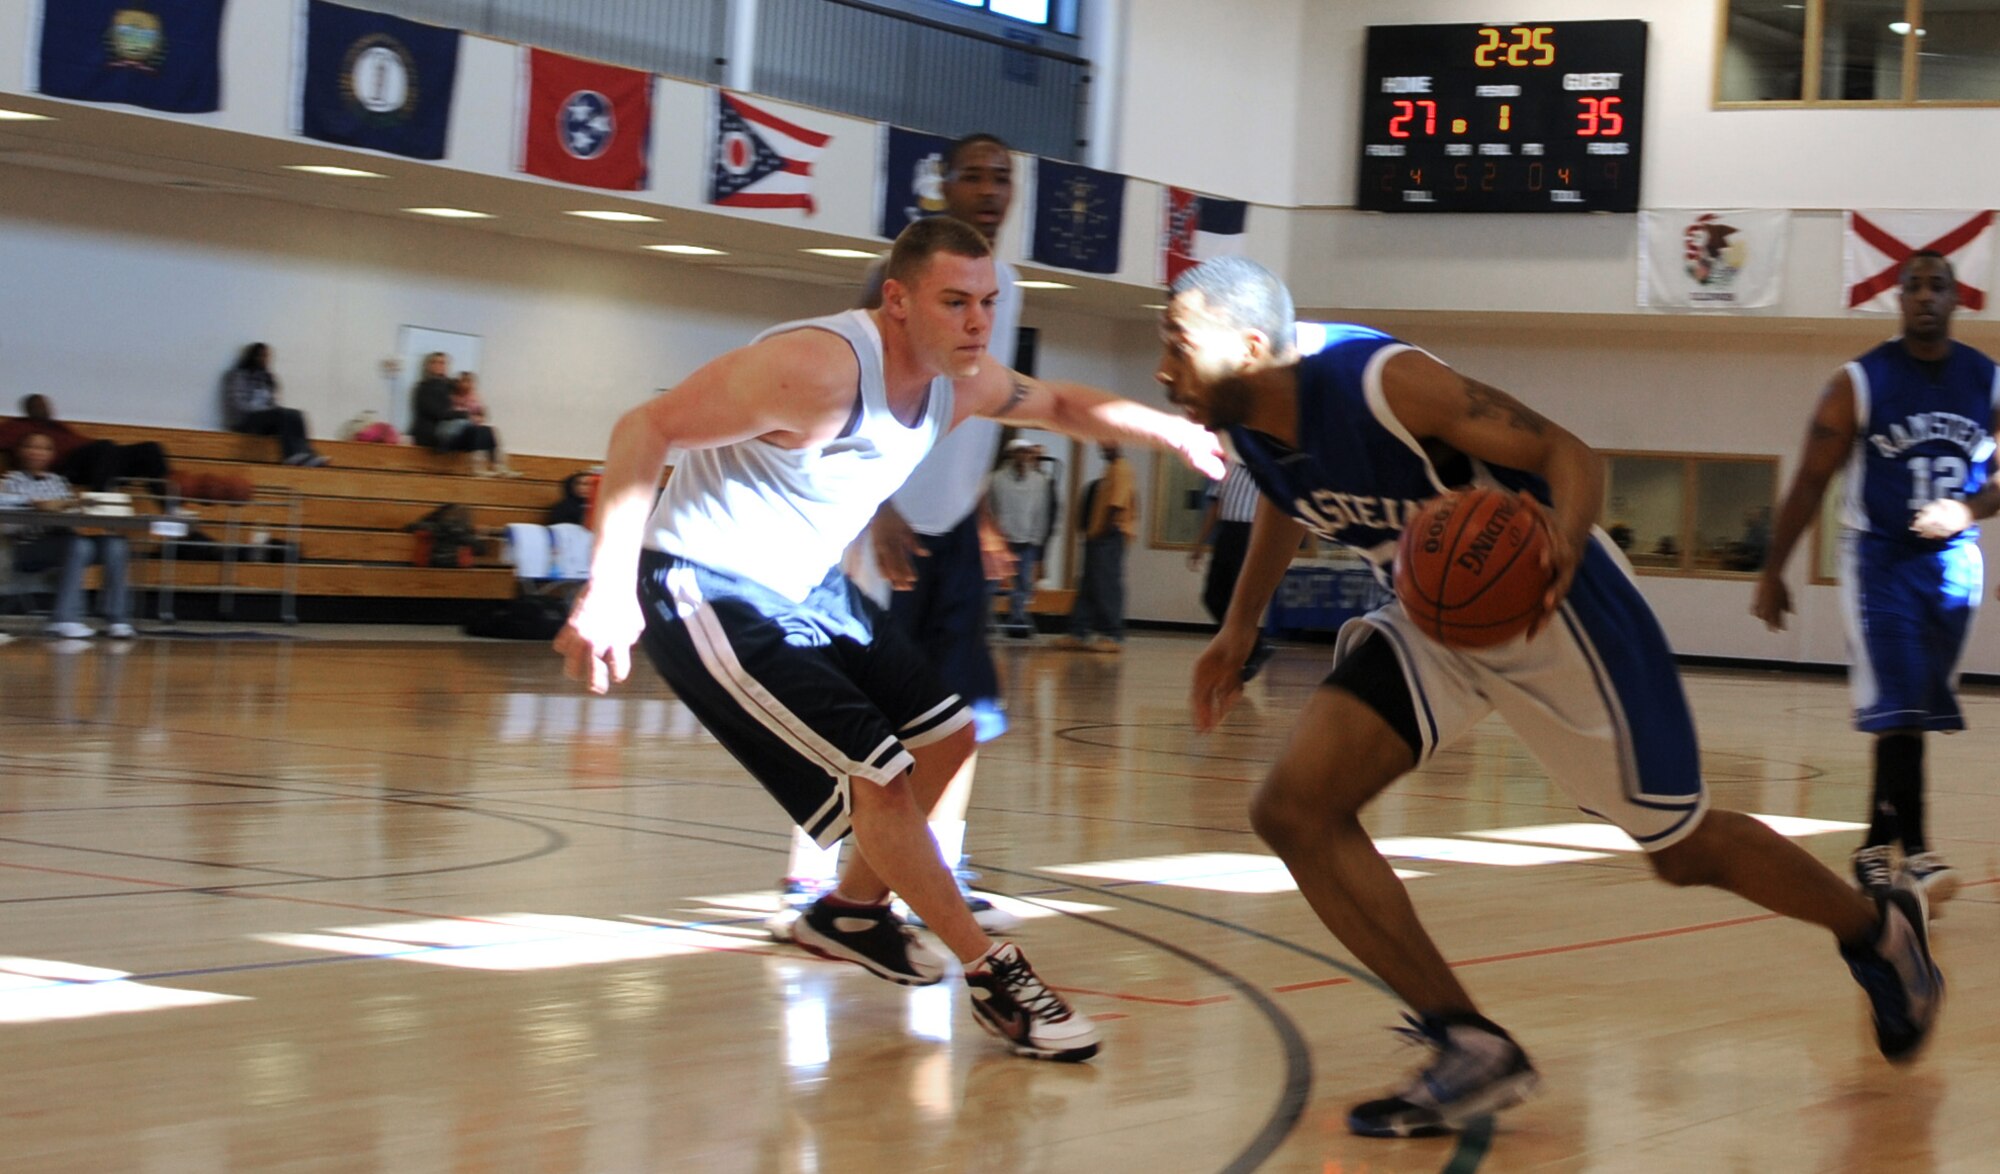 RAF MILDENHALL, England -- Aaron Stafford, 20, drives the ball past Chris Maier, 14, for the 86th Services Squadron in the 2010 U.S. Air Forces in Europe Small Unit/Intramural Basketball Championships at the Hardstand Fitness Center here March 7. The 86th Communications Squadron prevailed in the 91-86 game against the 86th SVS. Both teams are part of the 86th Airlift Wing at Ramstein Air Base, Germany. (U.S. Air Force photo/Staff Sgt. Thomas Trower)